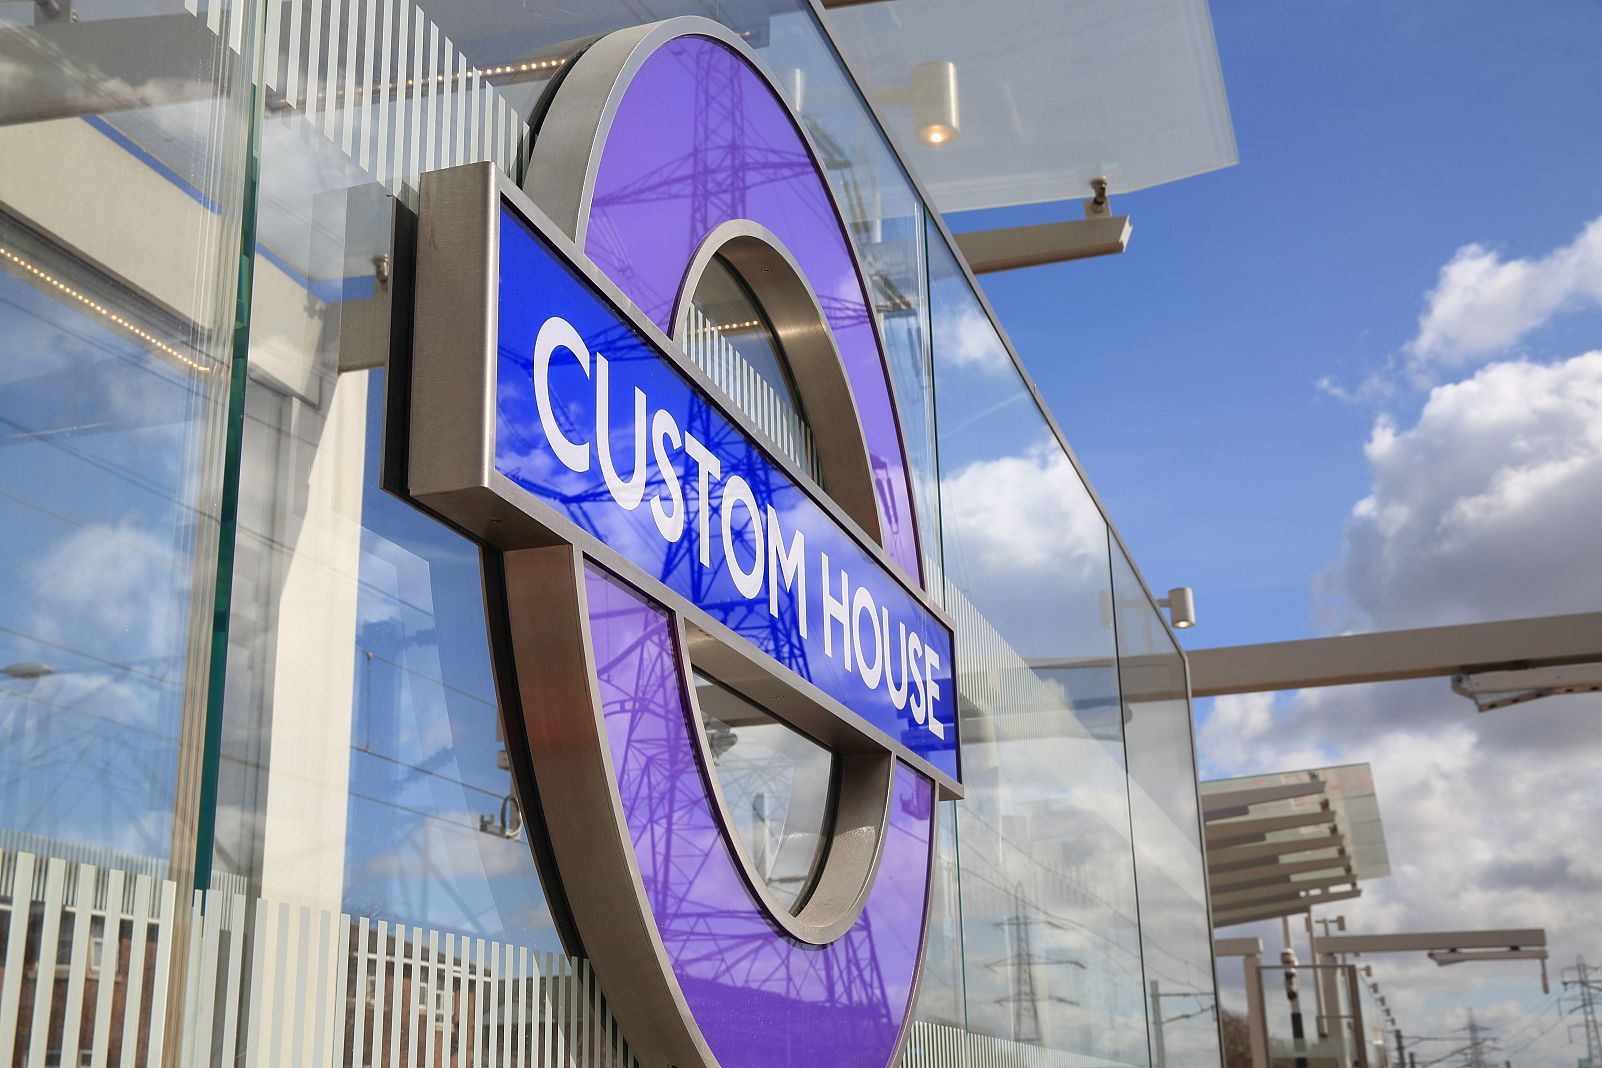 Elizabeth line opening is game-changer for London events industry says ExCeL CEO